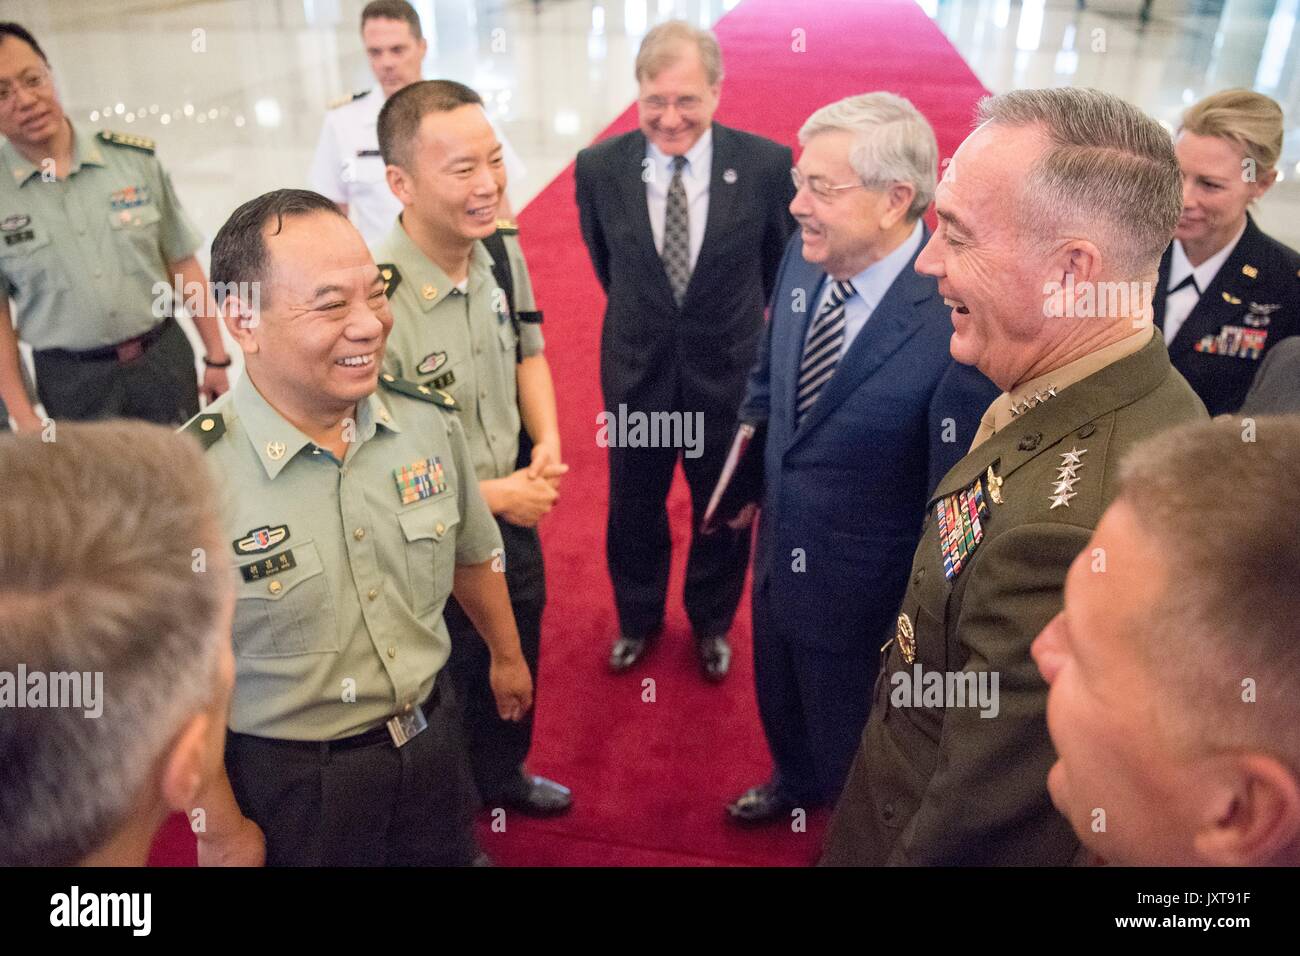 Beijing, China. 17th Aug, 2017. U.S. Chairman of the Joint Chiefs Gen. Joseph Dunford, right, chats with Chinese army officers as he arrives for his meeting with Chinese Gen. Fan Chanlong, vice chairman of the Central Military Commission, at the headquarters of the Peoples Liberation Army August 17, 2017 in Beijing, China. Dunford is in China to discuss defusing the situation in North Korea. Credit: Planetpix/Alamy Live News Stock Photo